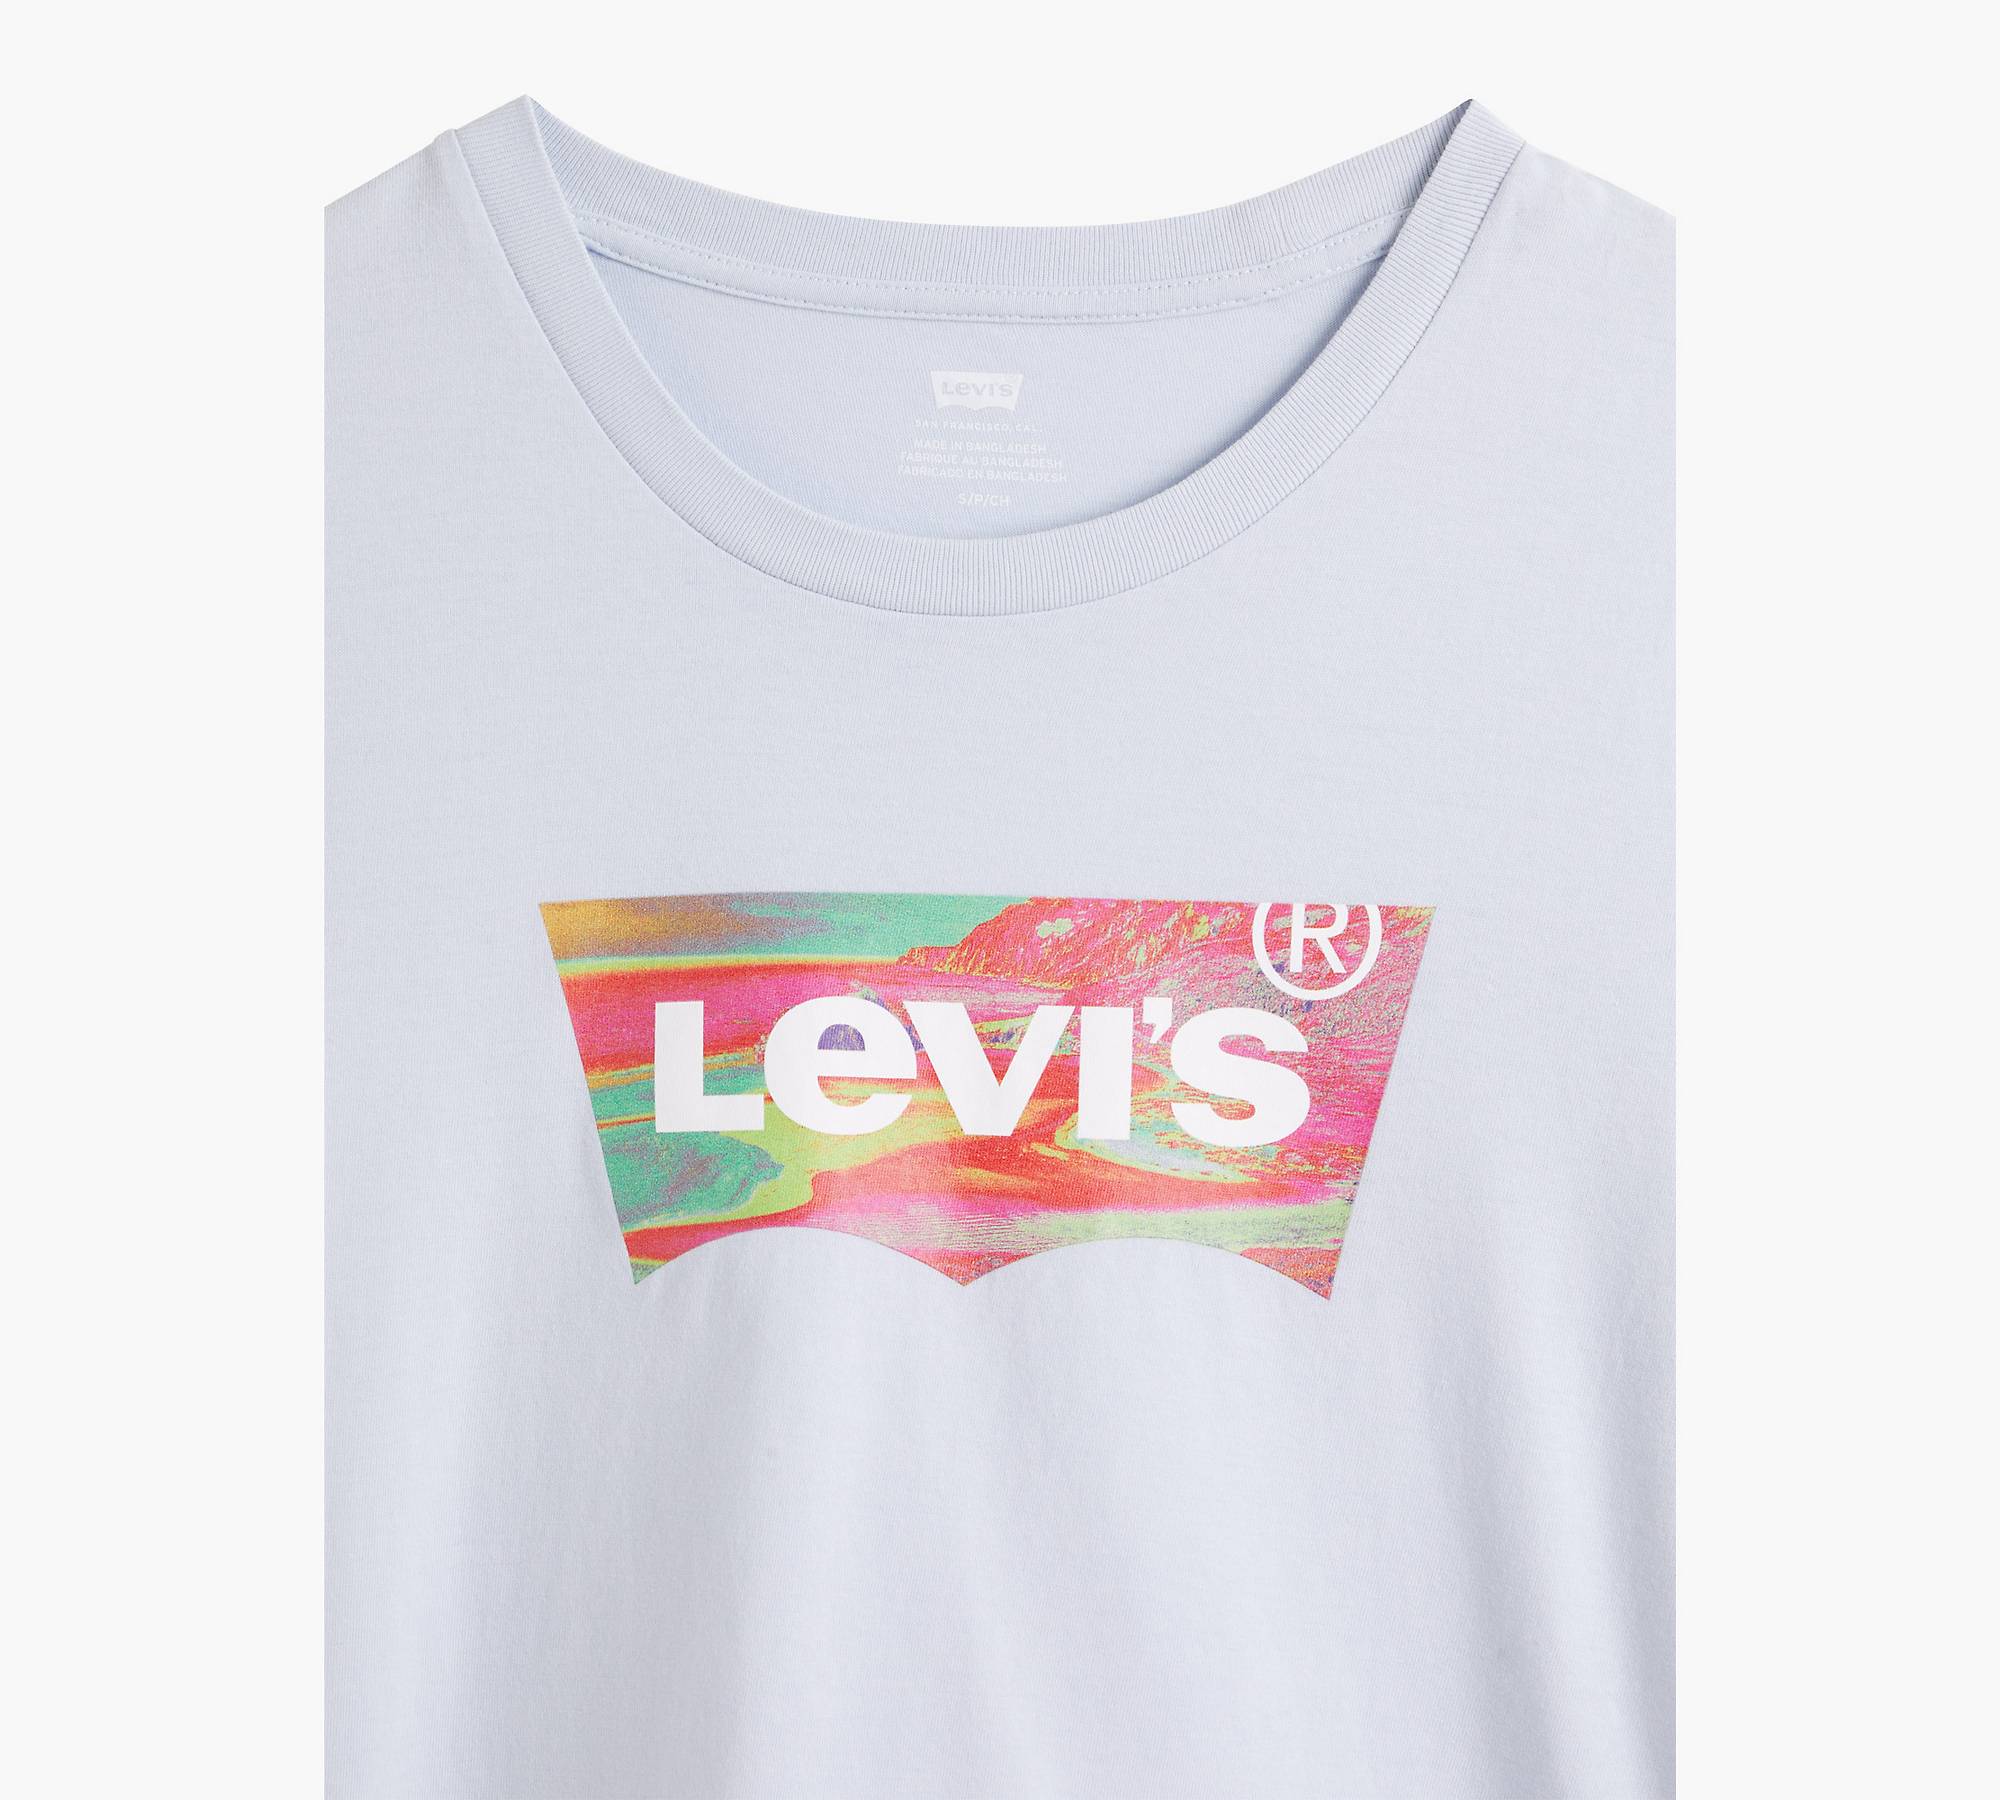 The Perfect Tee - Blue | Levi's® GB